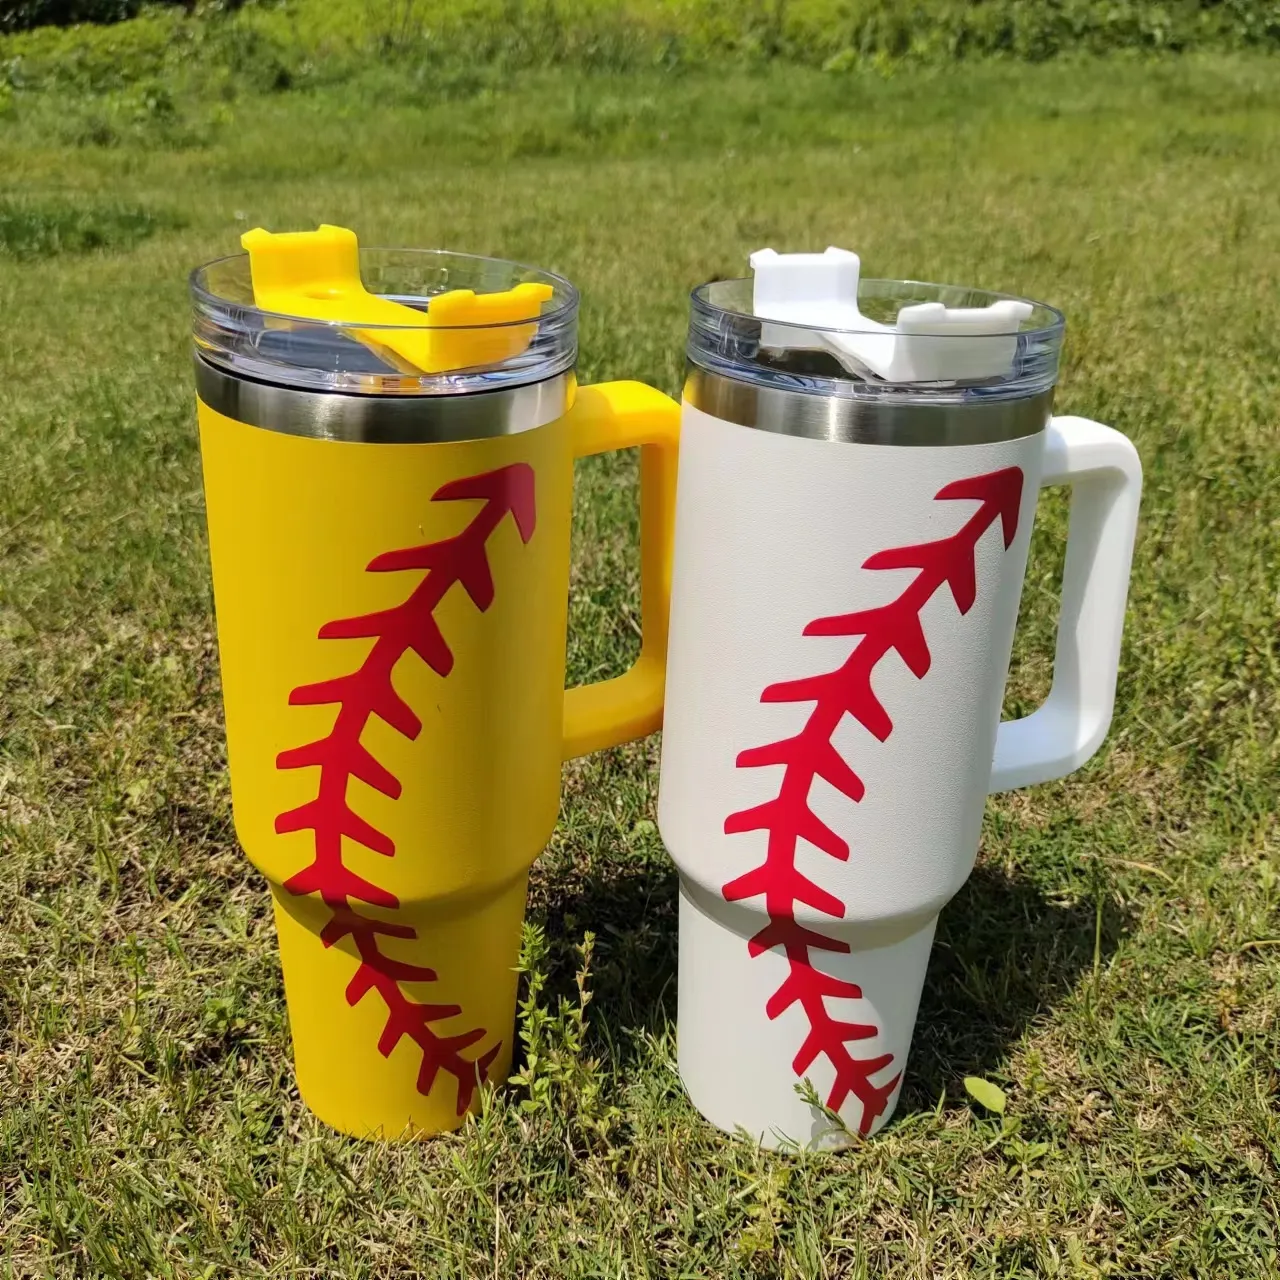 40oz tumbler designer tumblers baseball football basketball design stainless steel with Logo handle lid straw beer mug water bottle outdoor camping cup